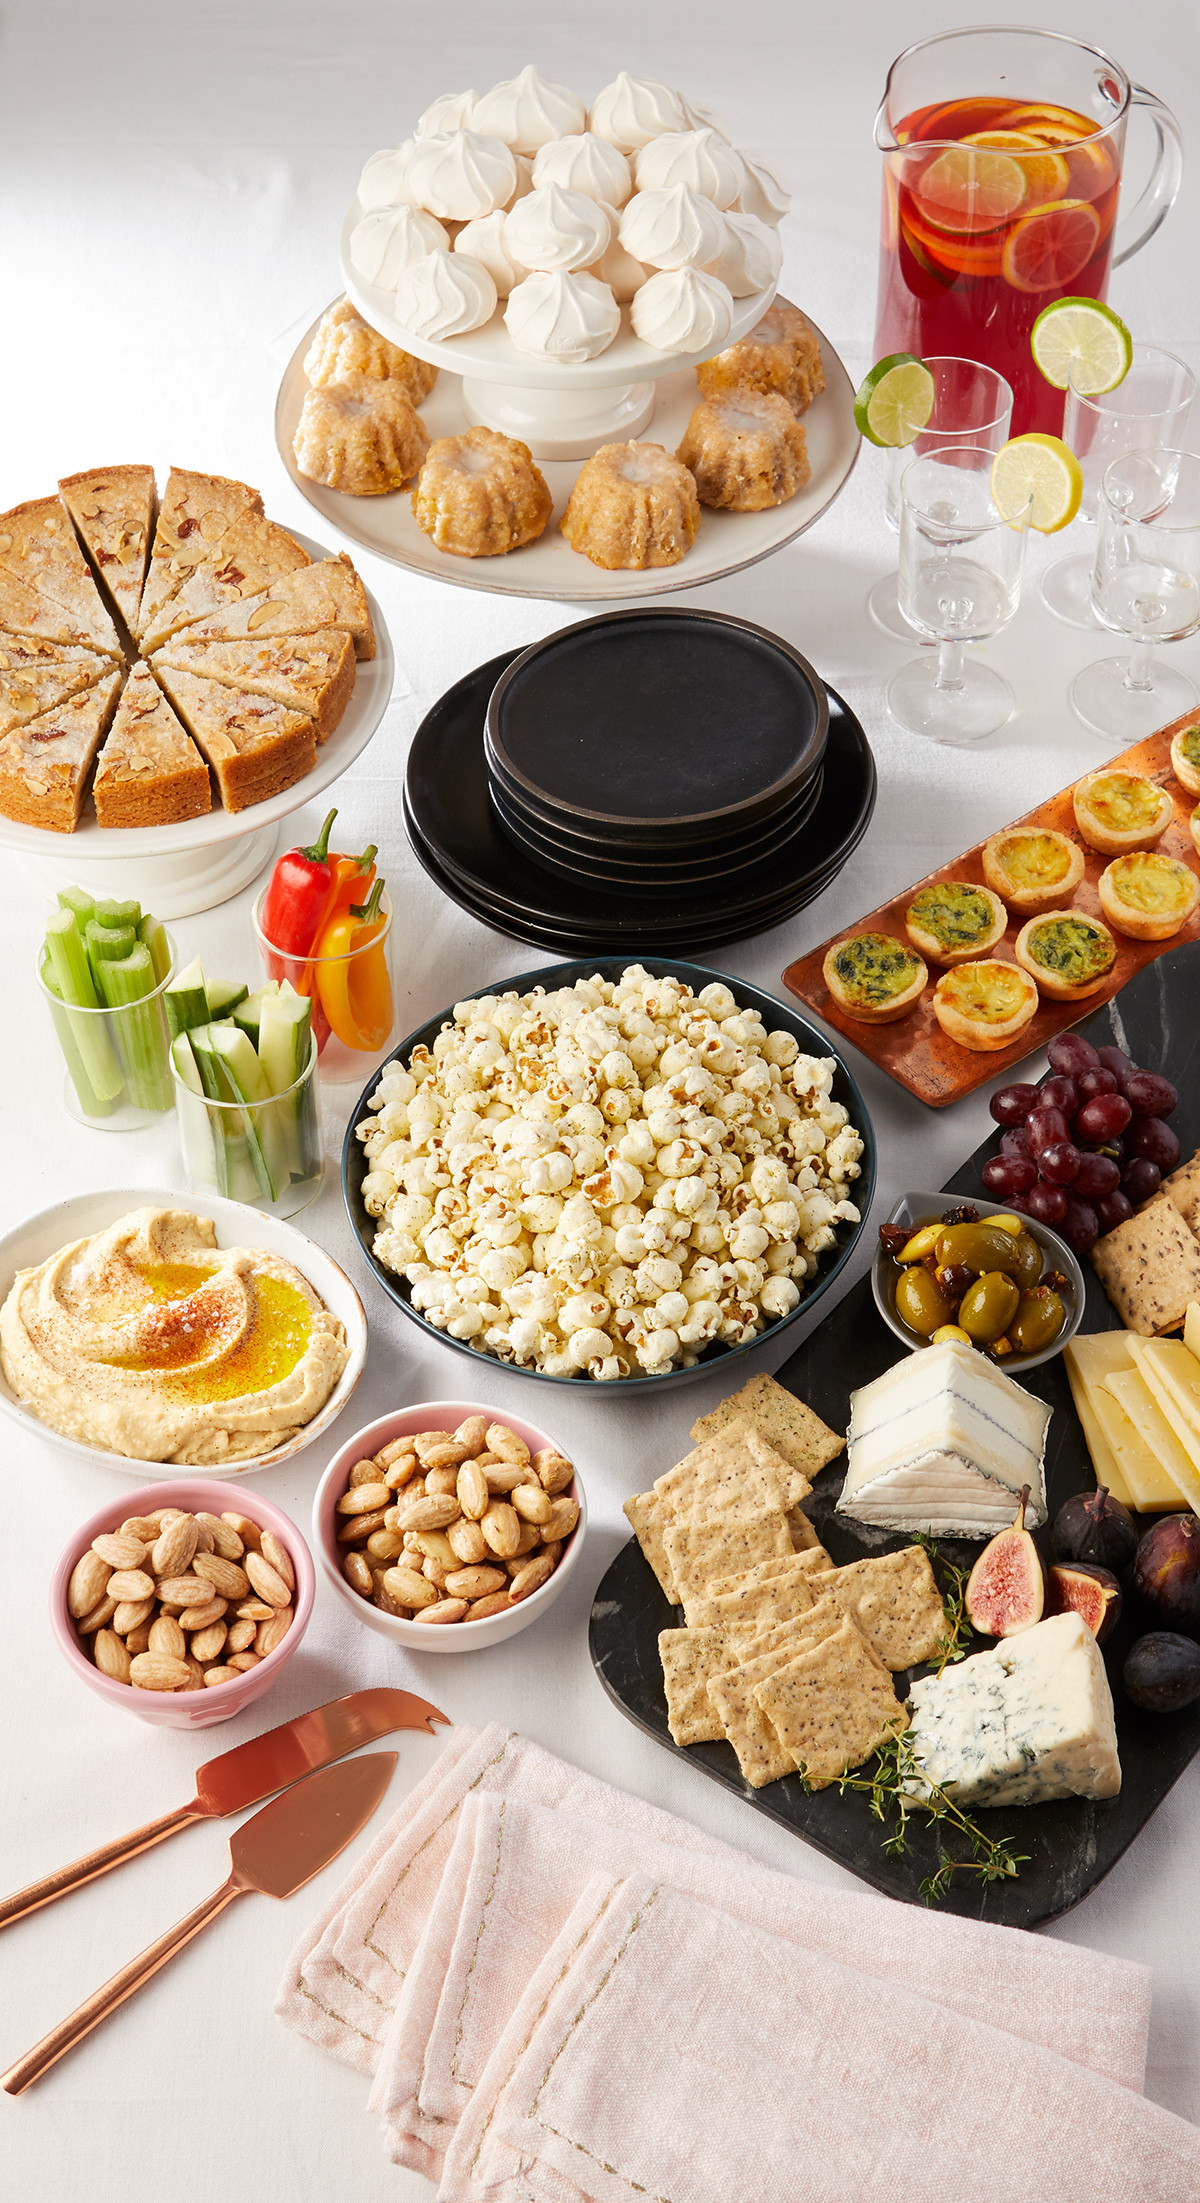 Birthday Dinner Ideas For Adults
 Host an Appetizers ly Dinner Party Finger Food Ideas